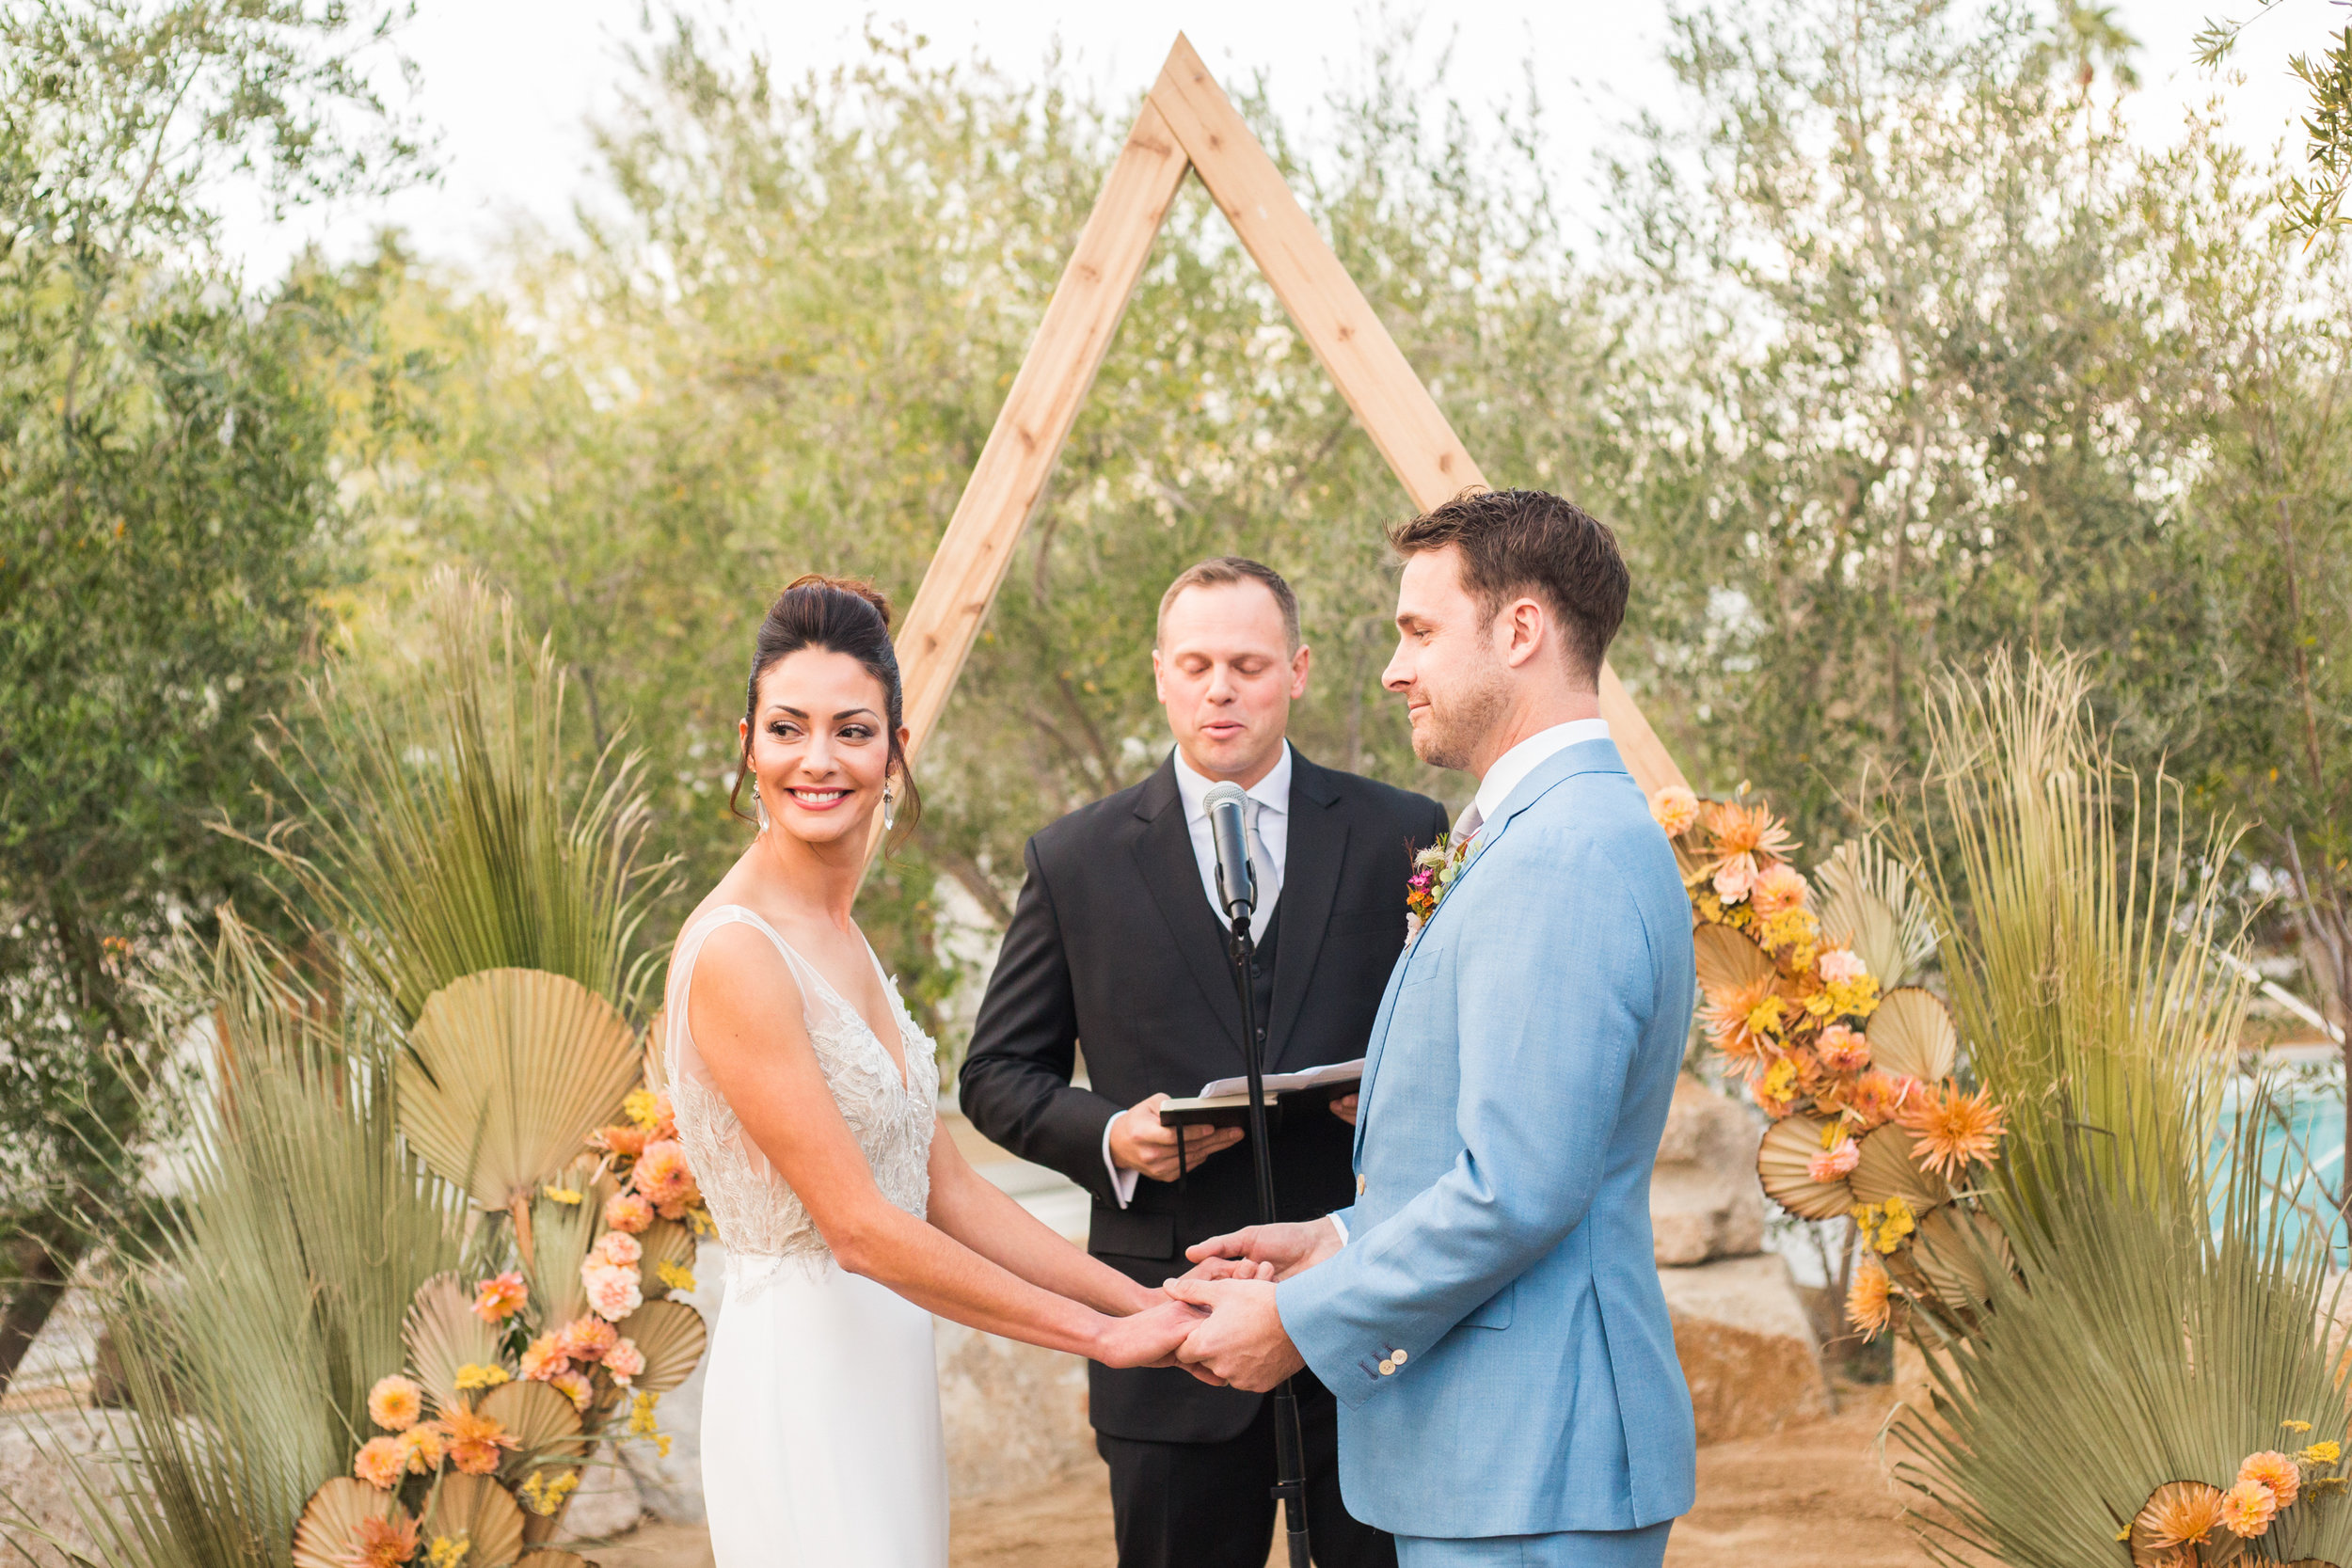 Colorful desert wedding ceremony at Ace hotel